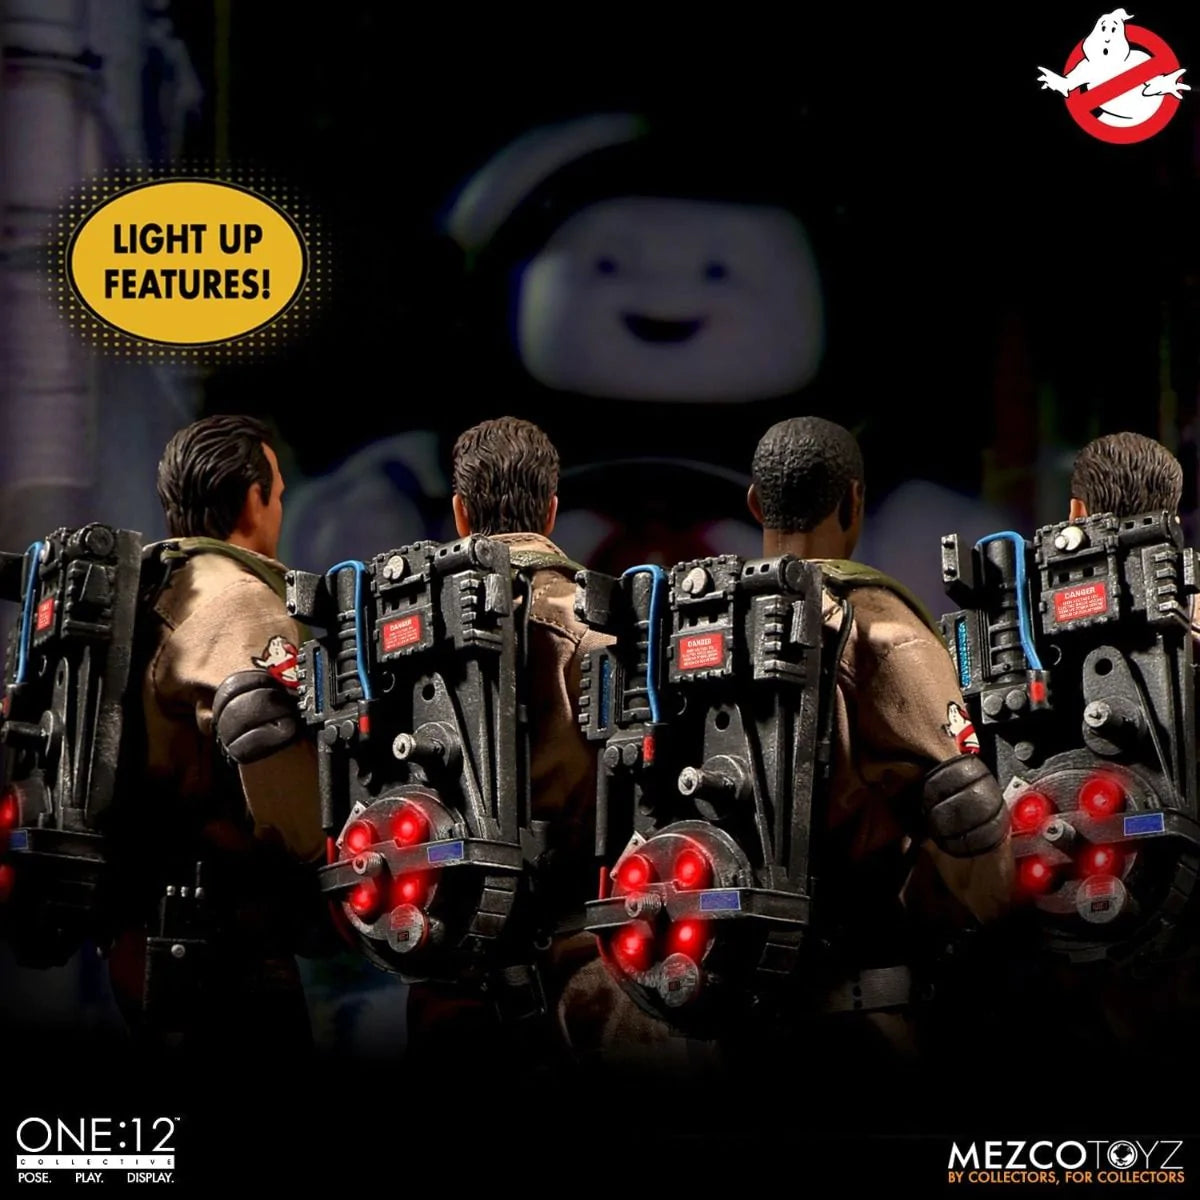 Ghostbusters One:12 Deluxe Set - Ghostbusters Mezco Toyz